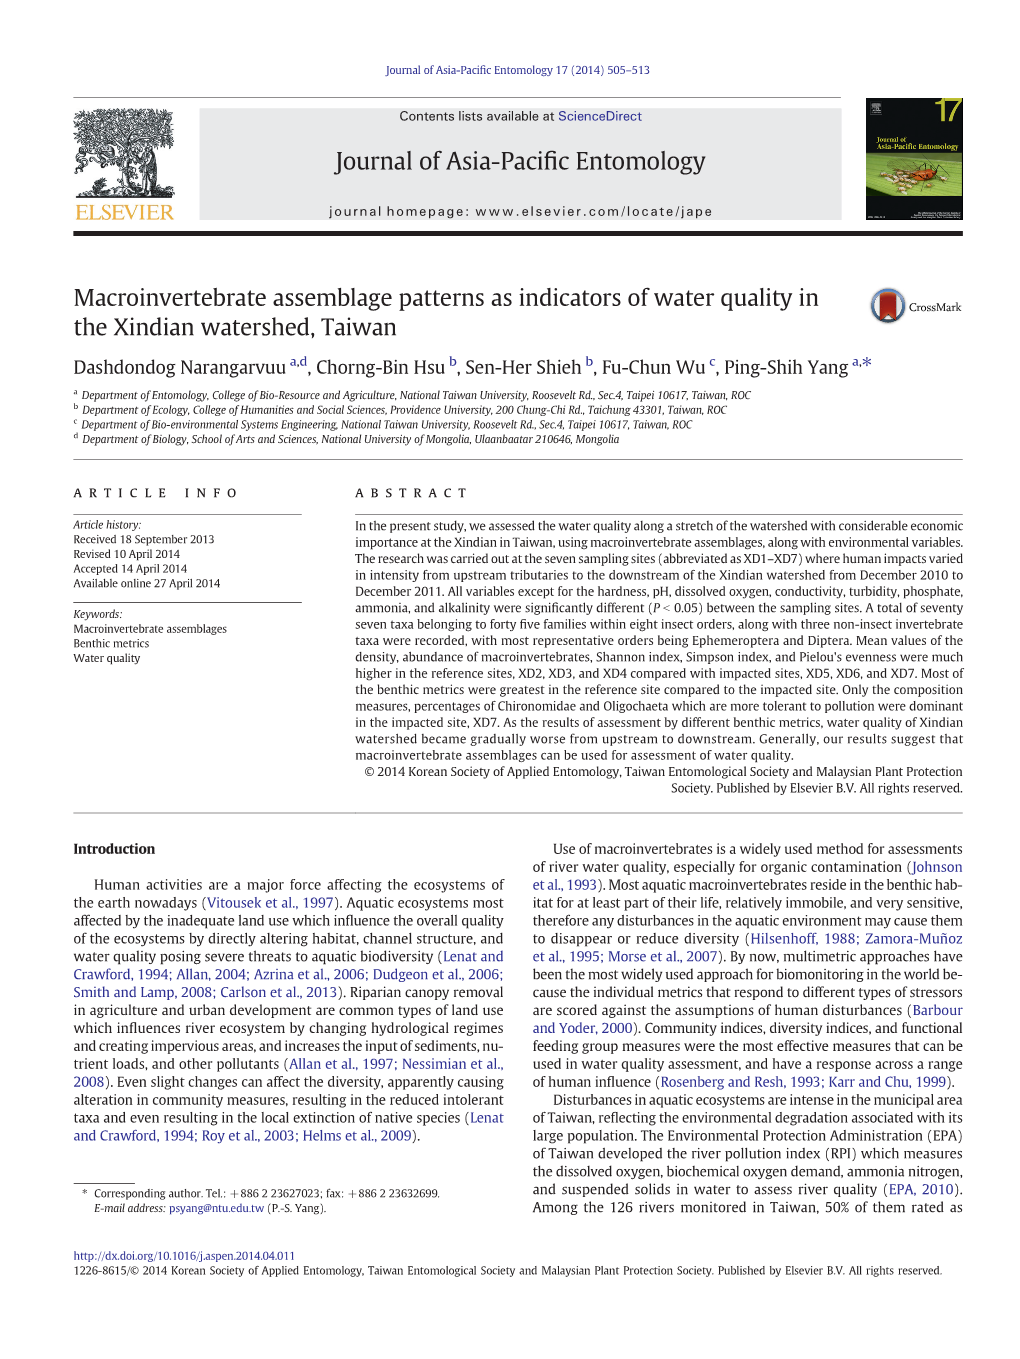 Macroinvertebrate Assemblage Patterns As Indicators of Water Quality in the Xindian Watershed, Taiwan